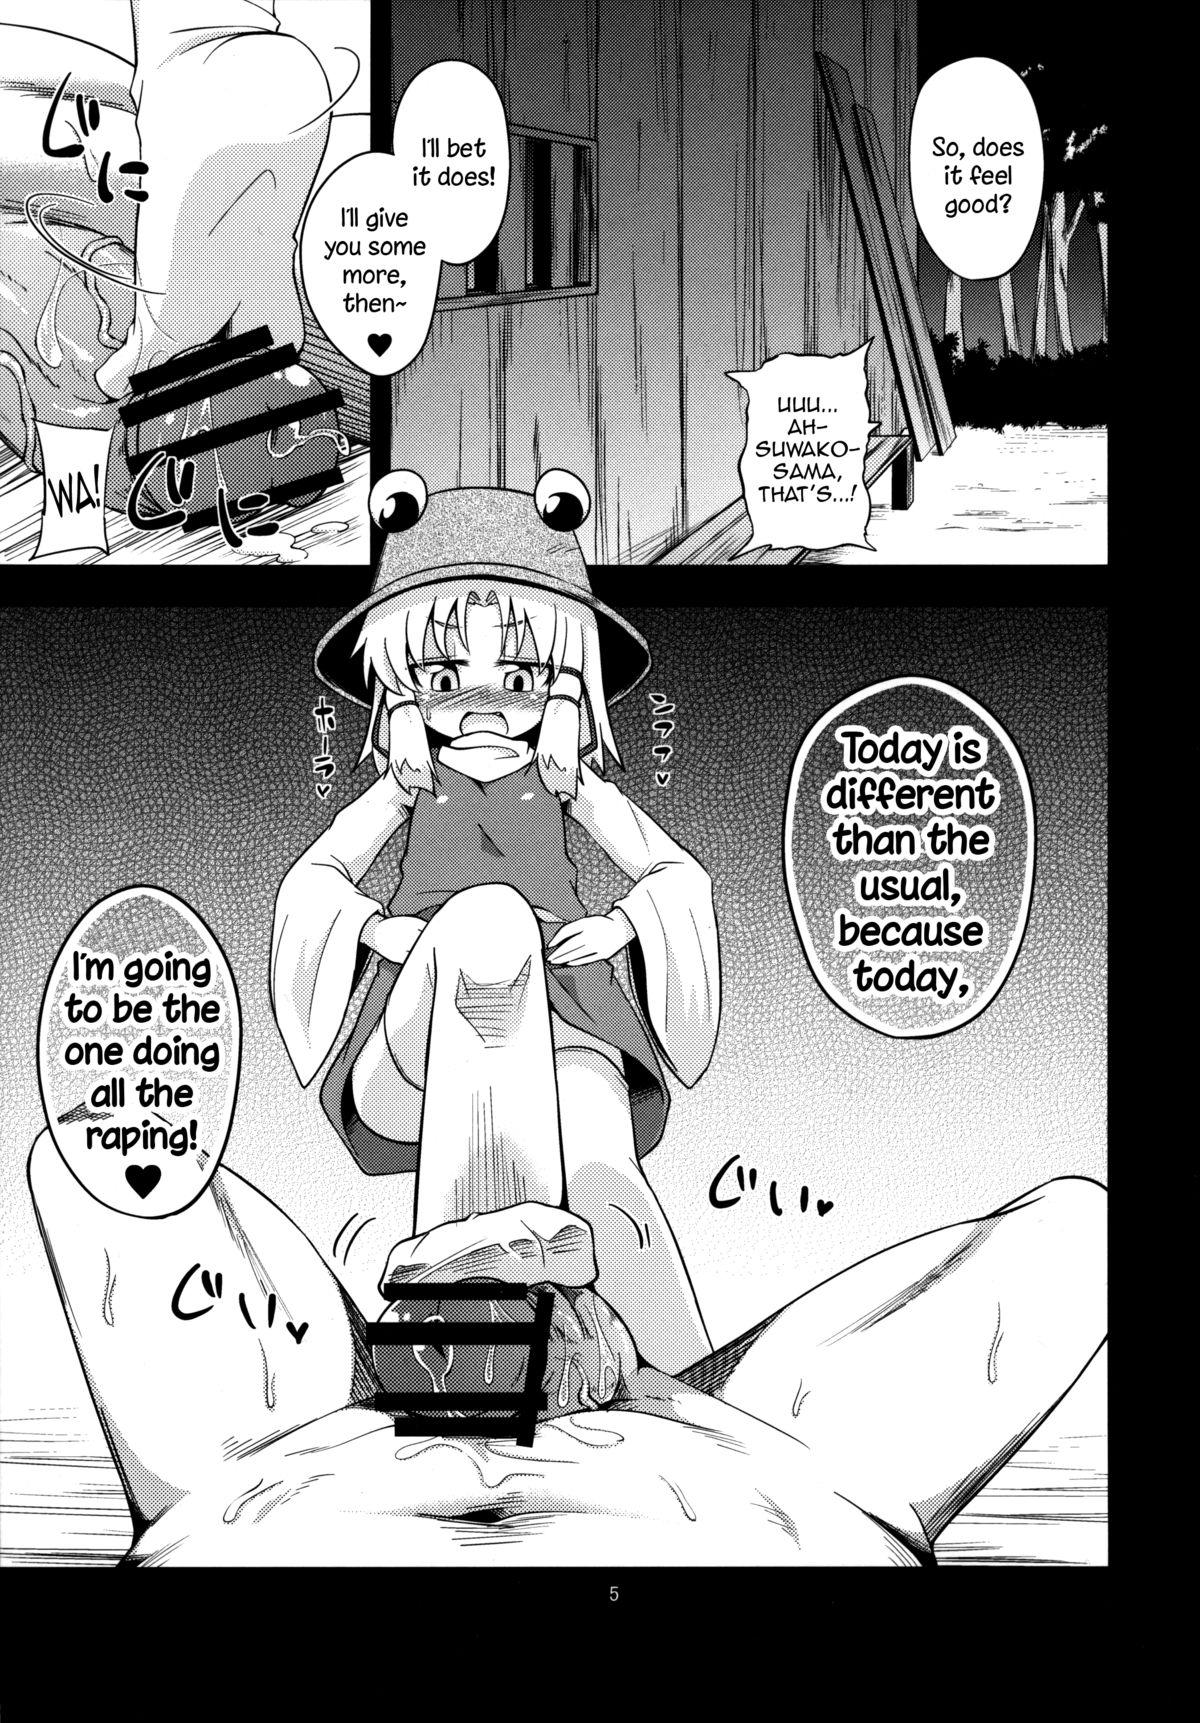 Cocksucker (C83) [Happiness Milk (Obyaa)] Nikuyokugami Gyoushin - Carnal desire in God [Again] - | Faith in the God of Carnal Desire - Carnal Desire in God [Again] (Touhou Project) [English] {Sharpie Translations} - Touhou project Animation - Page 5